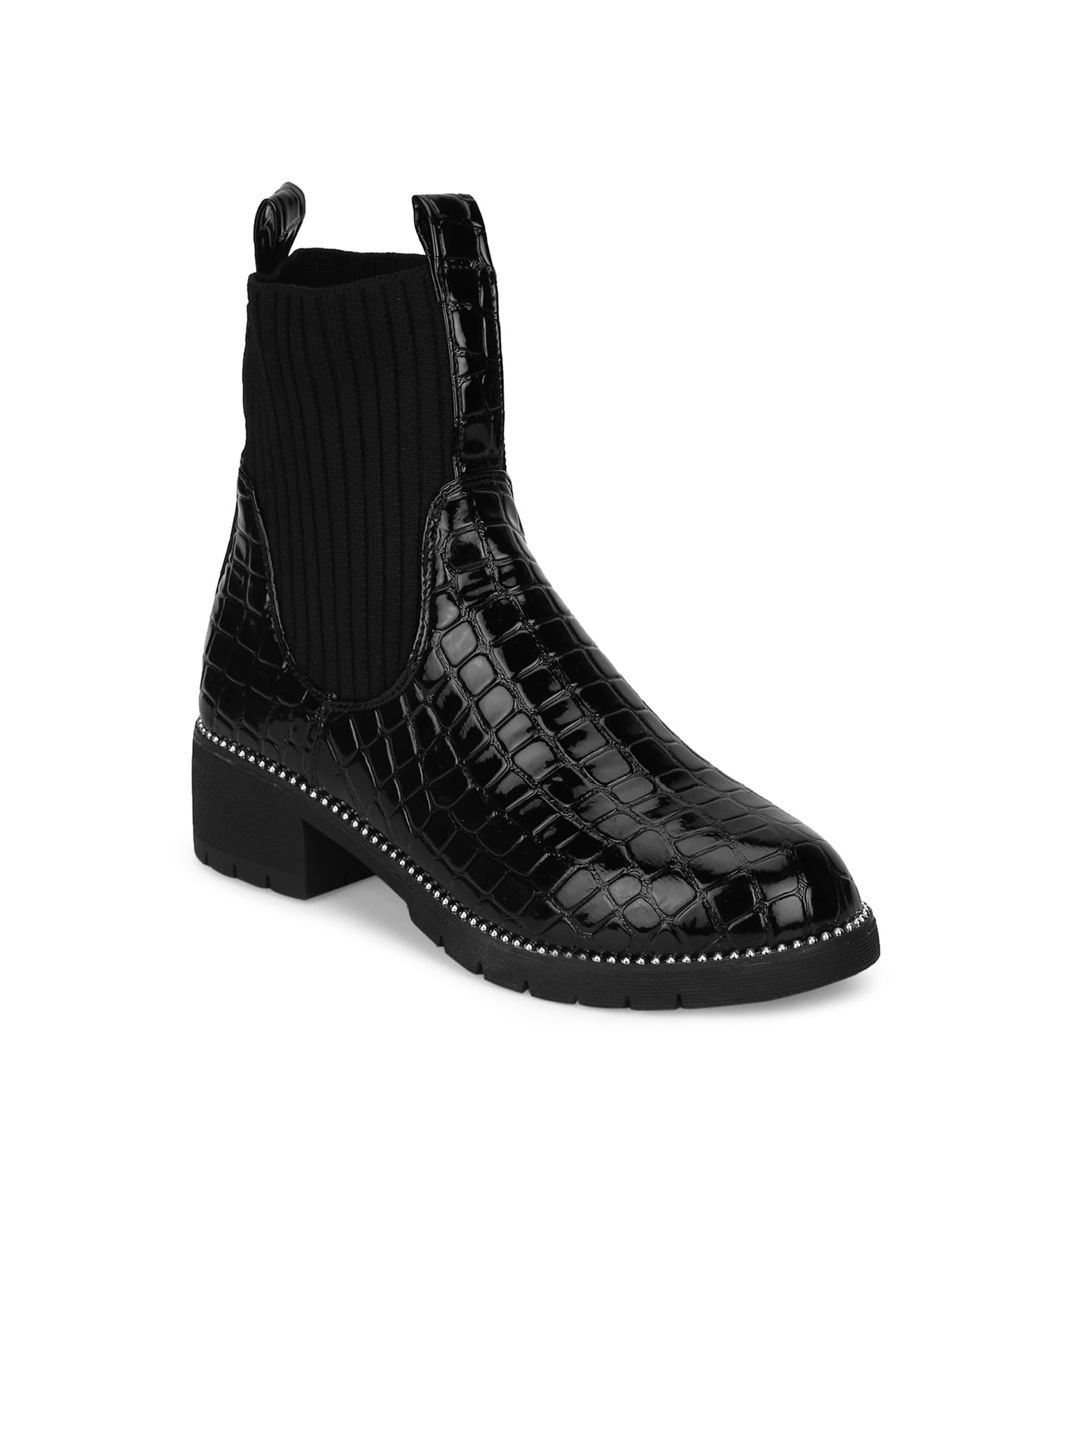 Truffle Collection Black Textured High-Top Block Heeled Boots Price in India